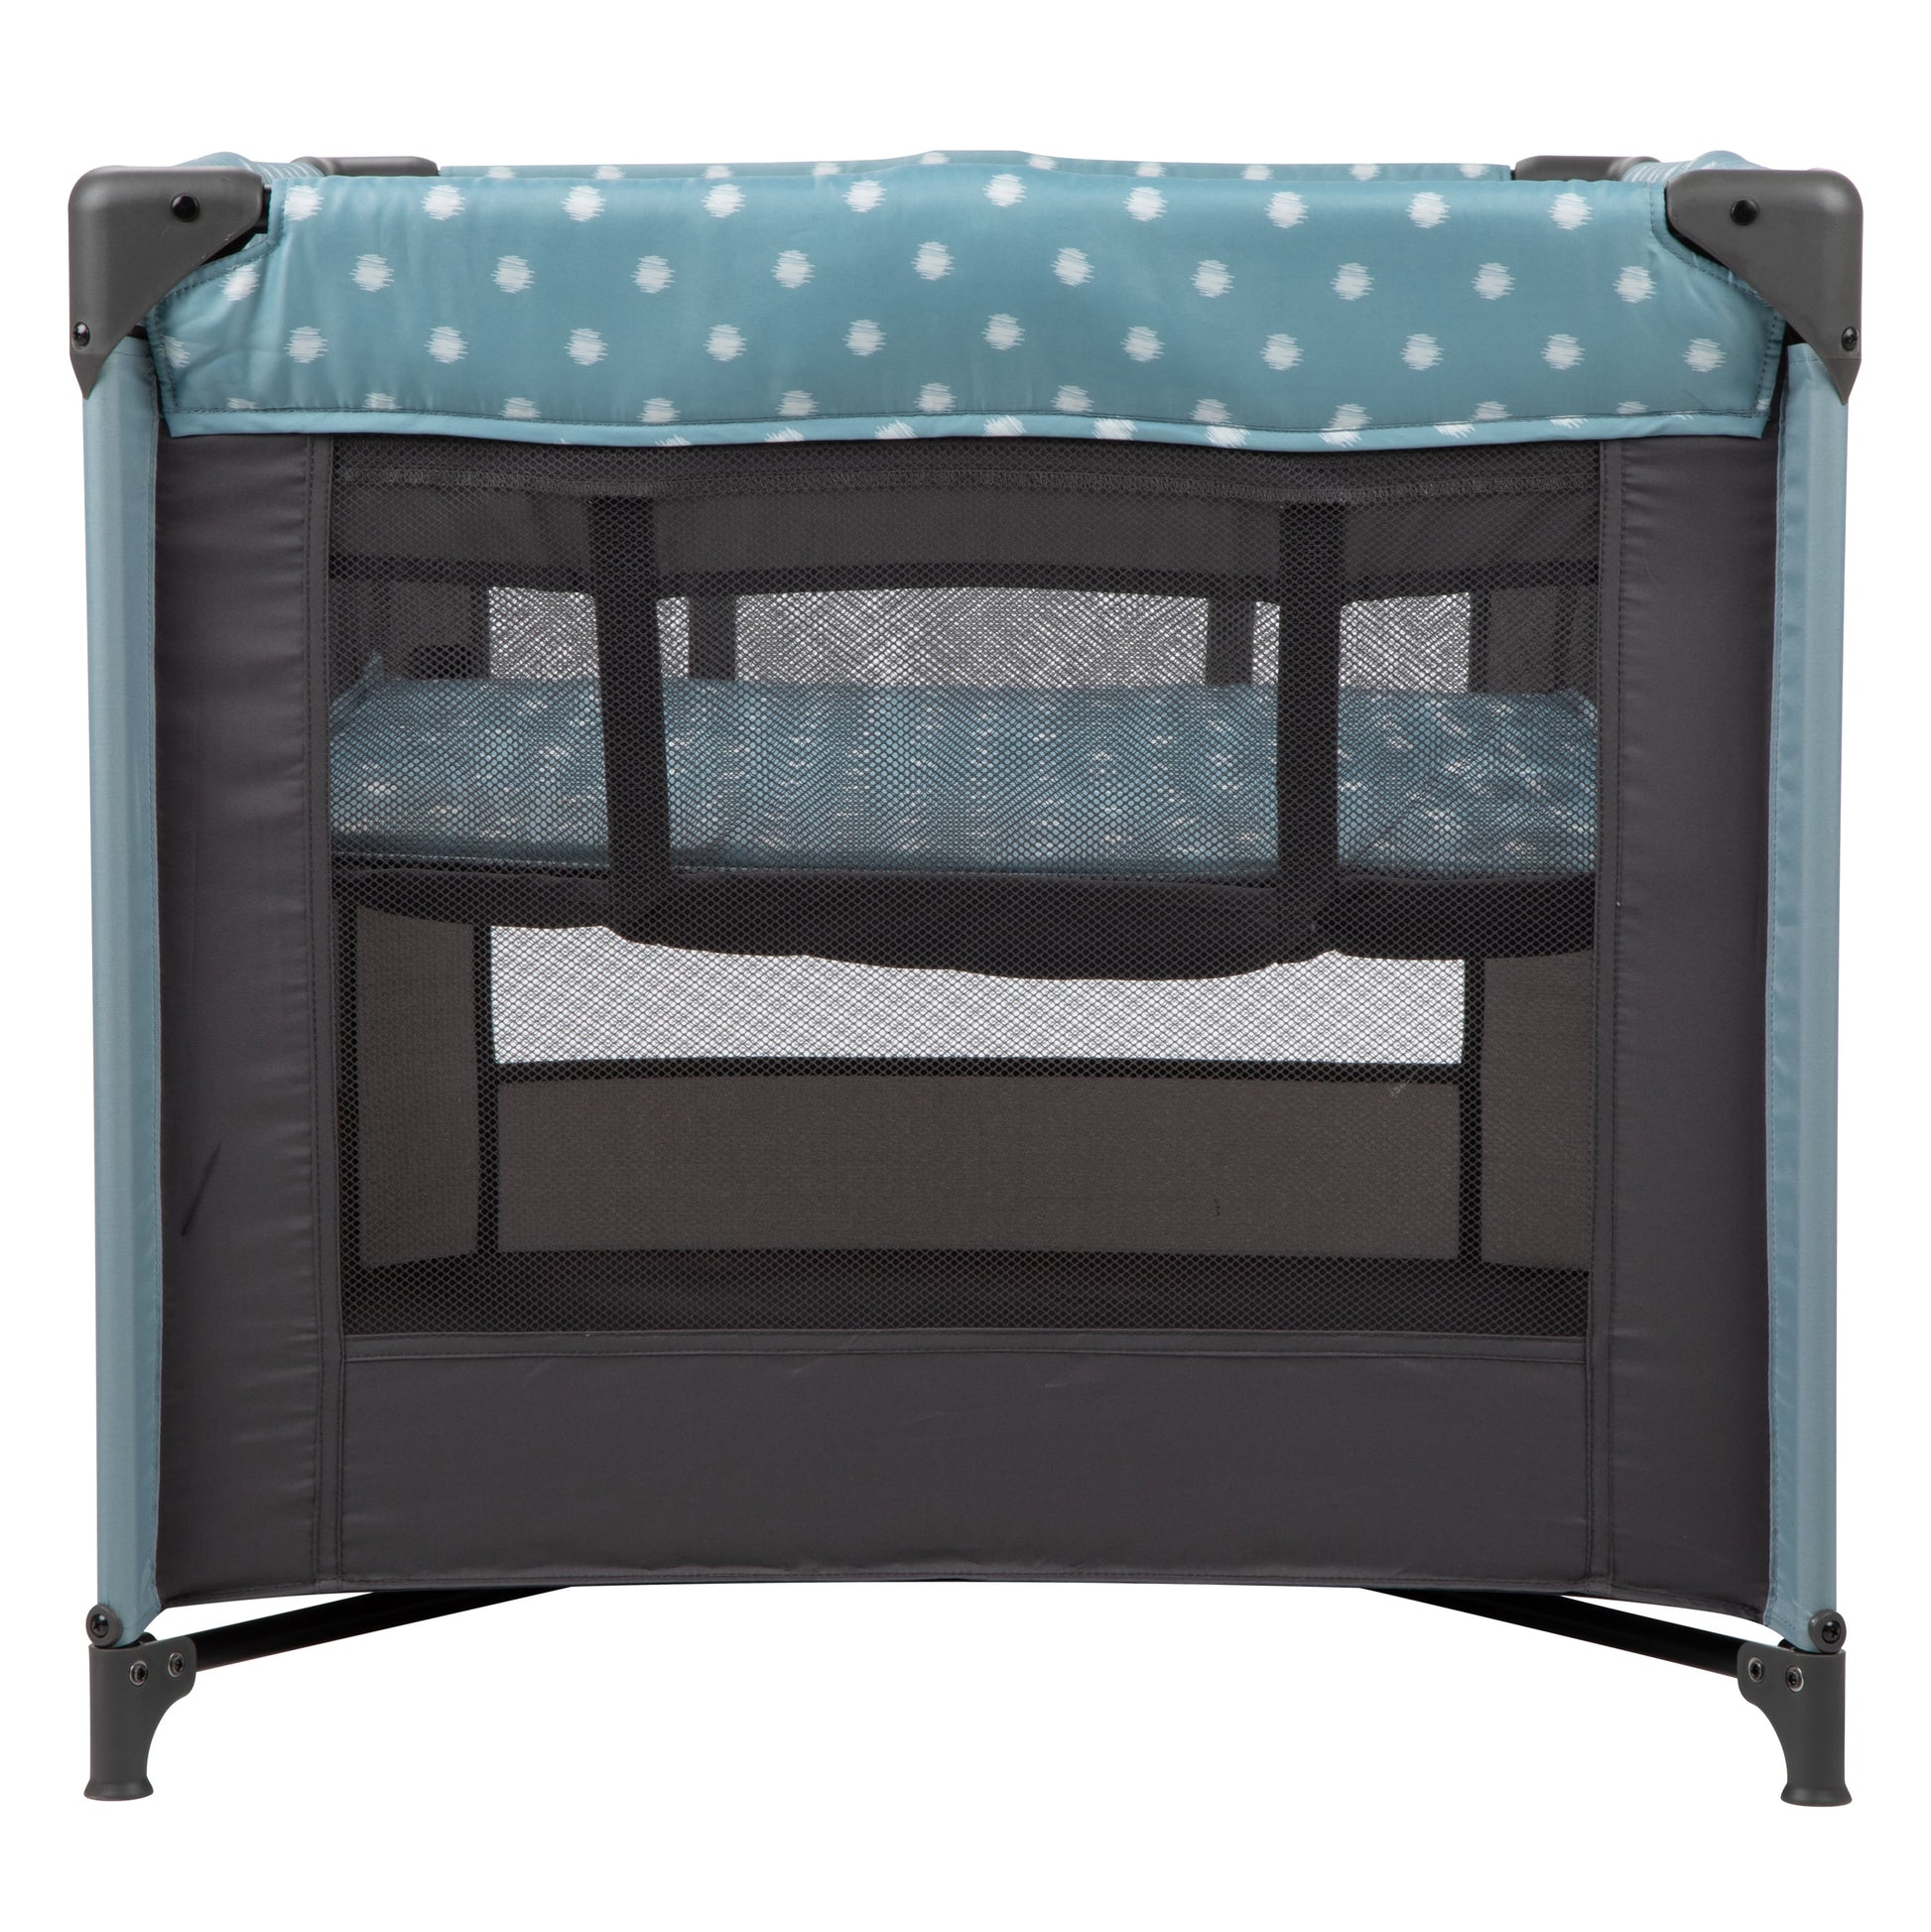 Dottie Baby Play Yard with Bassinet, Blue Dot